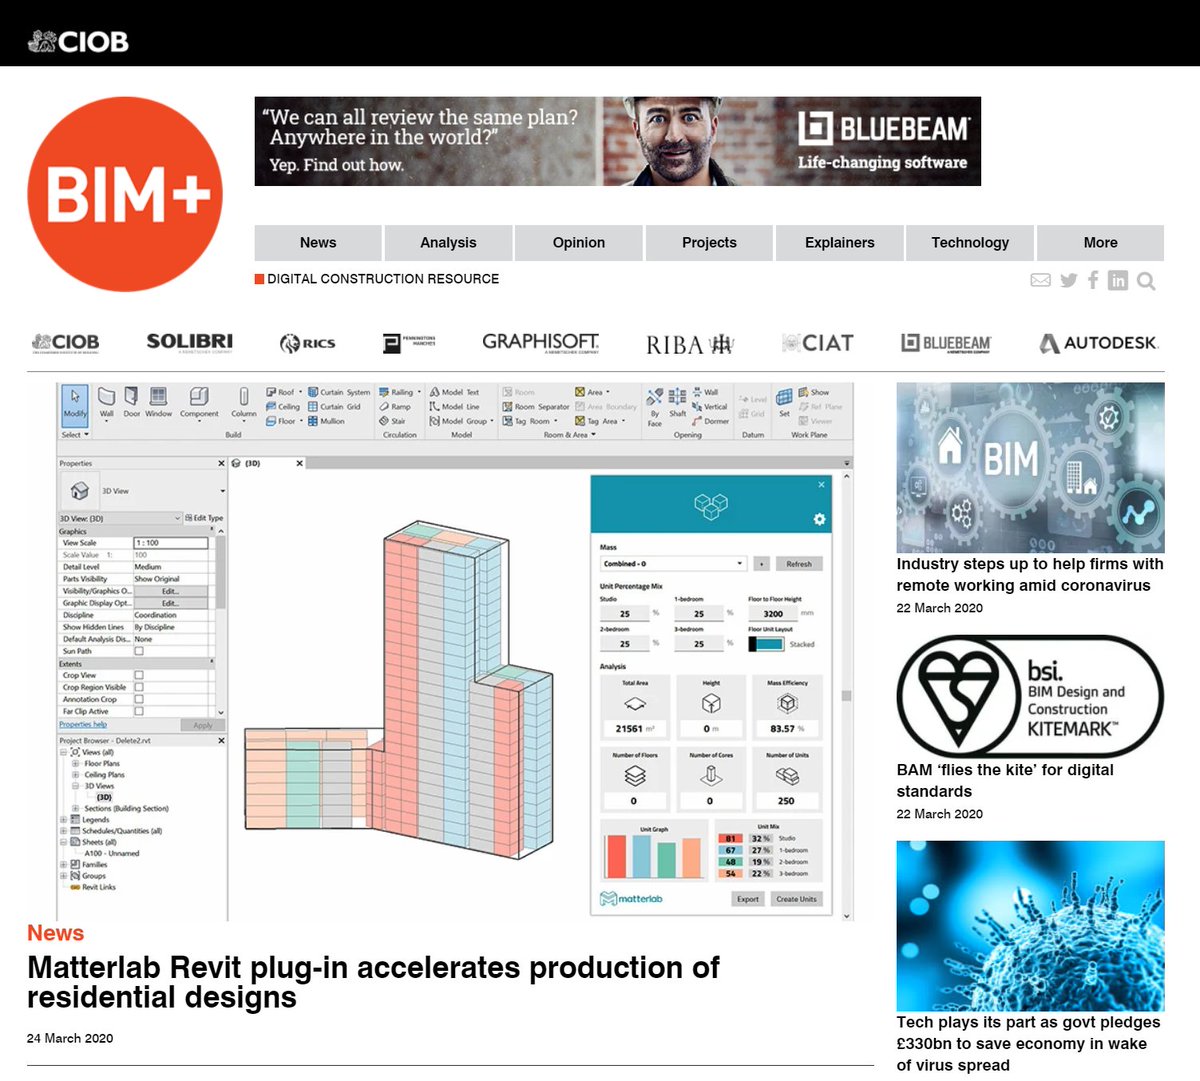 Our #Unitize tool was featured this week in @BIM_PLUS 

Read more about it below.

Matterlab Revit plug-in accelerates production of residential designs bimplus.co.uk/news/matterlab…